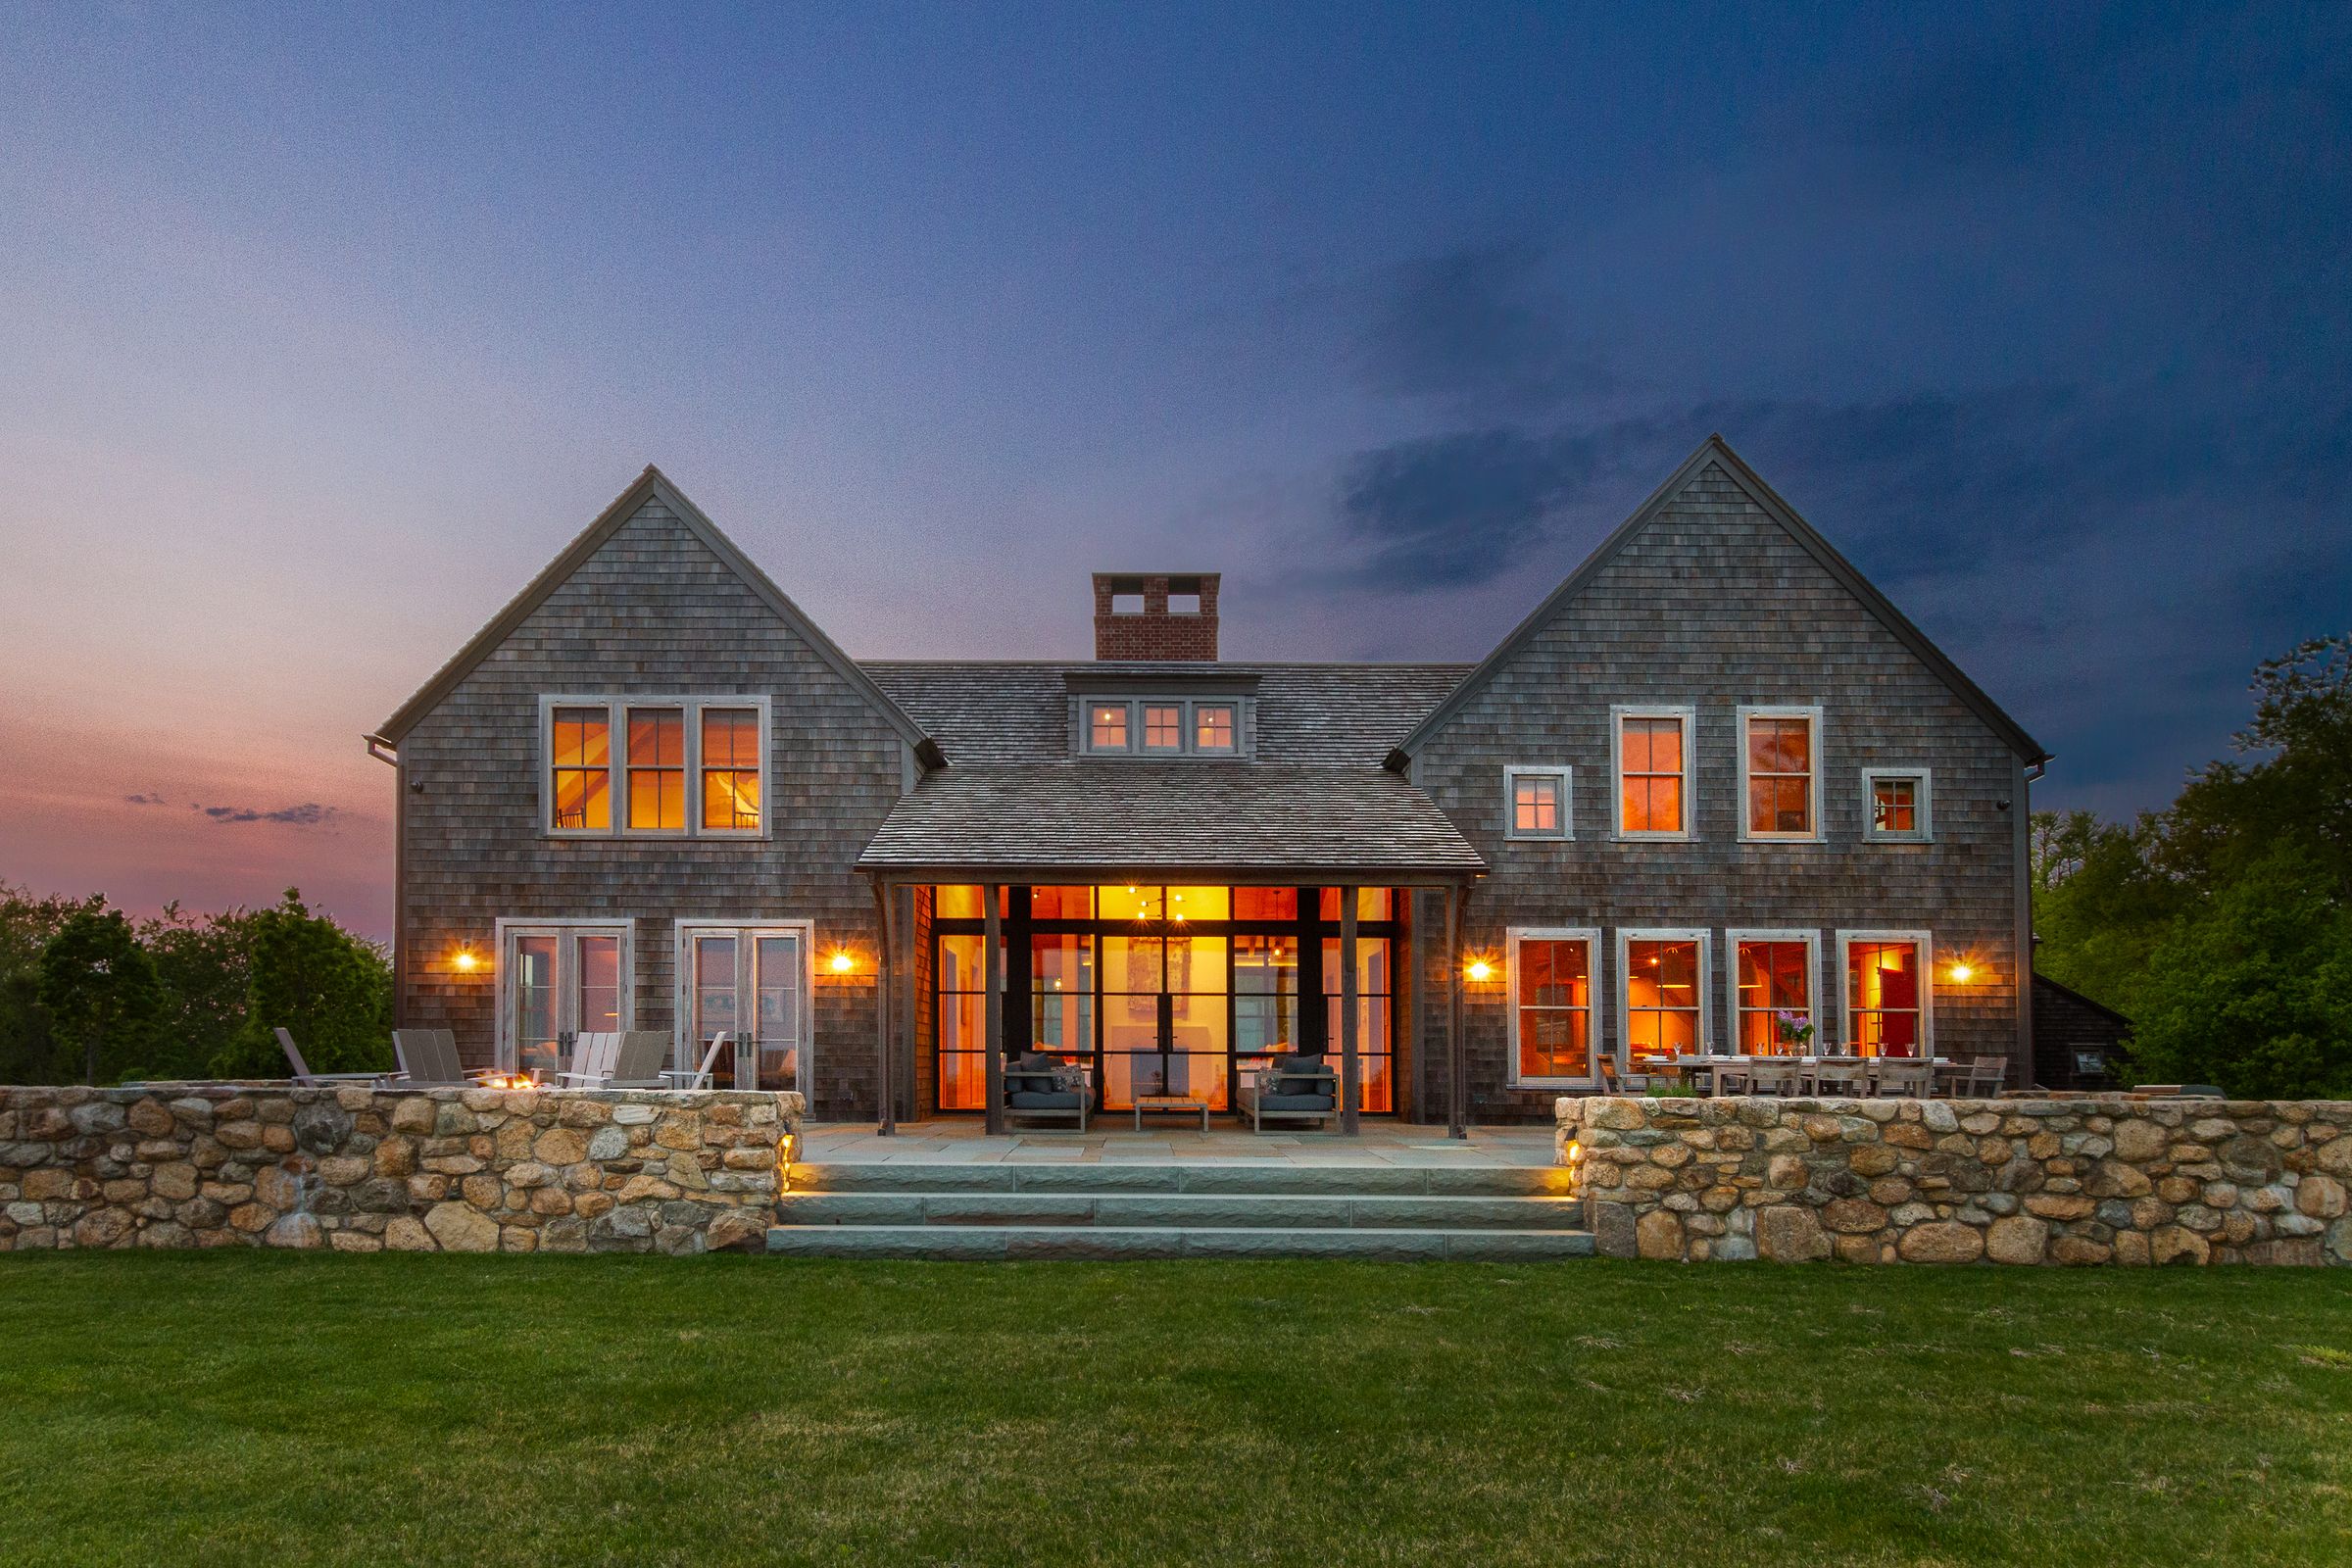 This Block Island Compound Asking $11.8M Is a New England Dream